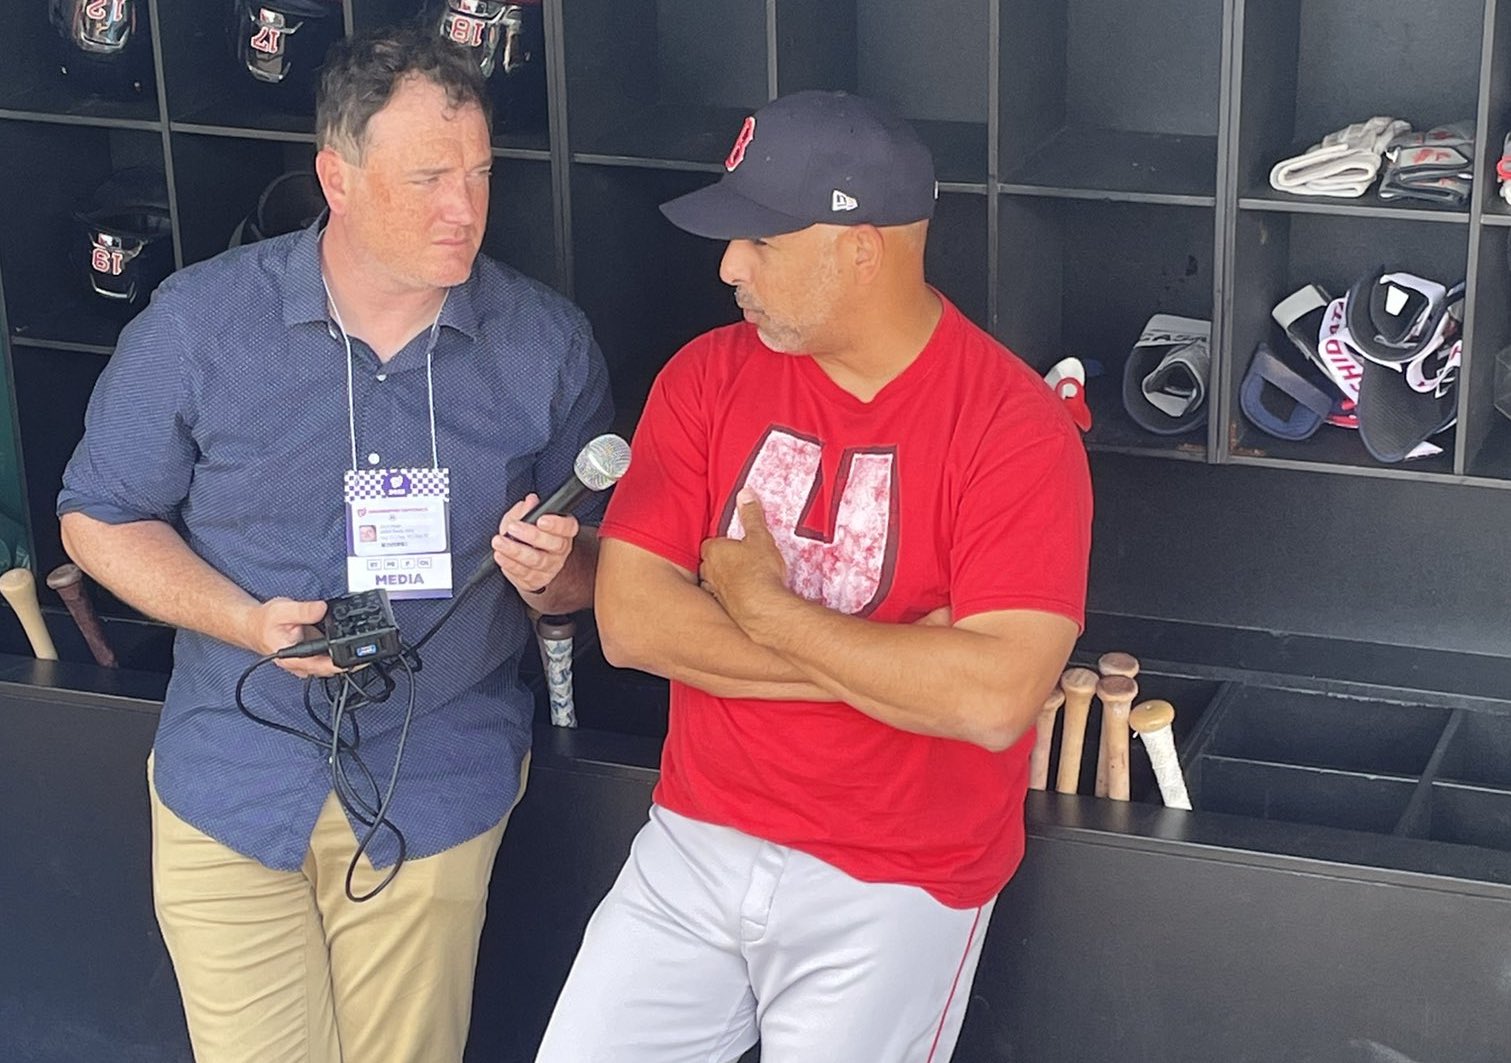 Red Sox' Alex Cora rocks 'Underdog' shirt but says it's not clubhouse theme  